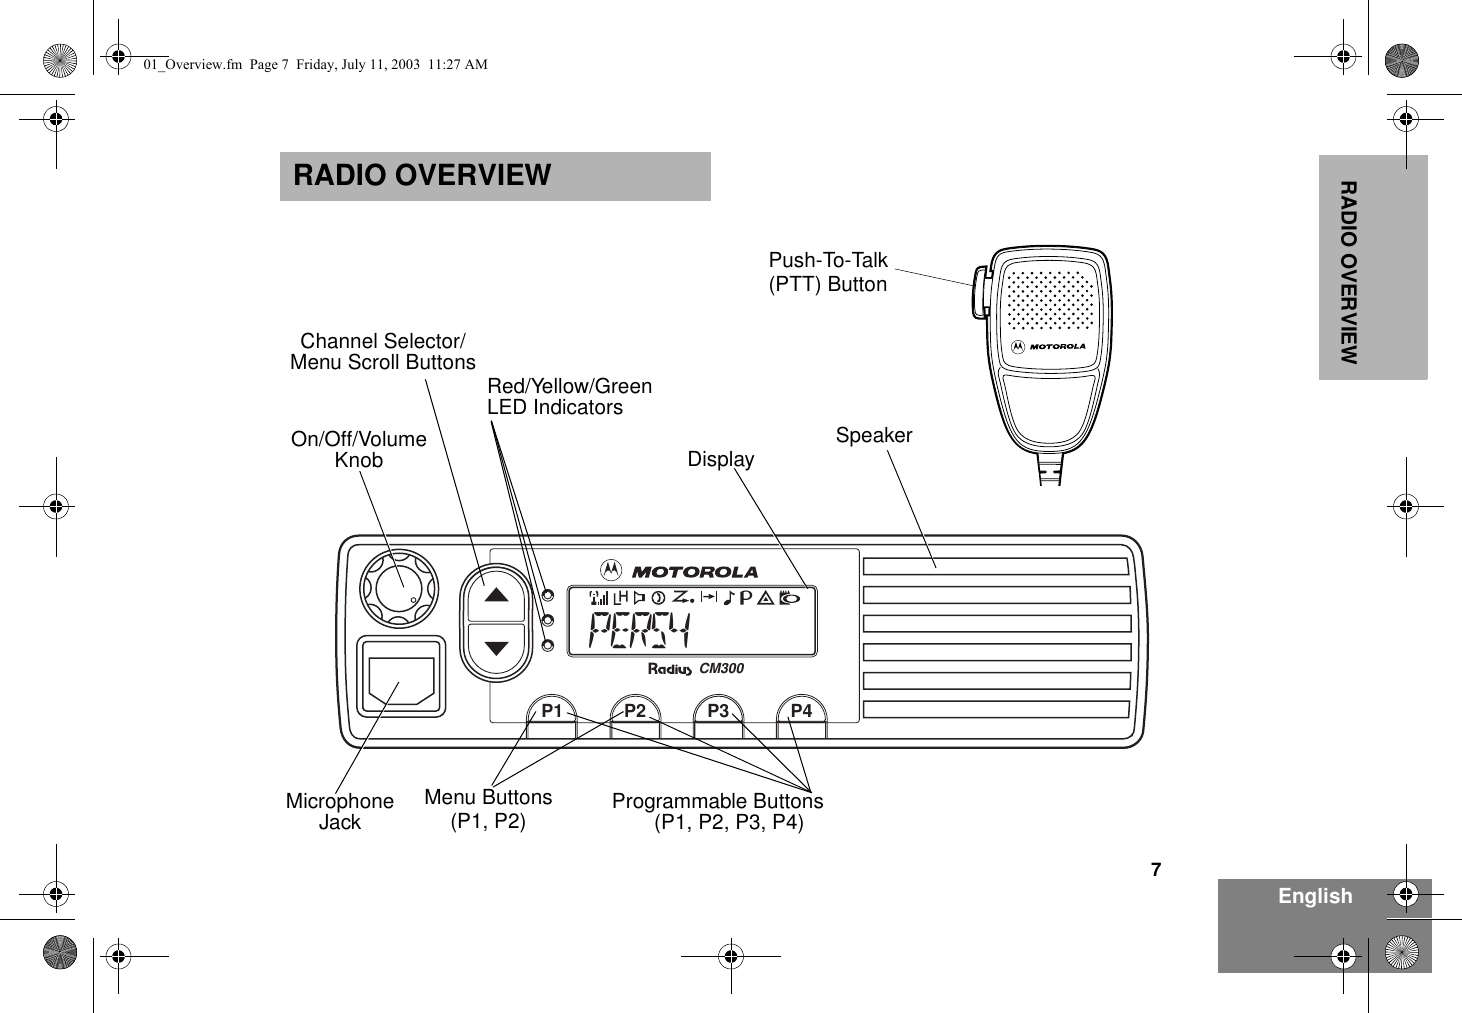 7EnglishRADIO OVERVIEWRADIO OVERVIEWP2P1 P3 P4CM300PERS4Red/Yellow/GreenLED Indicators(P1, P2, P3, P4)MicrophoneJackKnobOn/Off/VolumeProgrammable ButtonsDisplayChannel Selector/Push-To-Talk(PTT) ButtonSpeakerMenu Scroll ButtonsMenu Buttons(P1, P2)01_Overview.fm  Page 7  Friday, July 11, 2003  11:27 AM